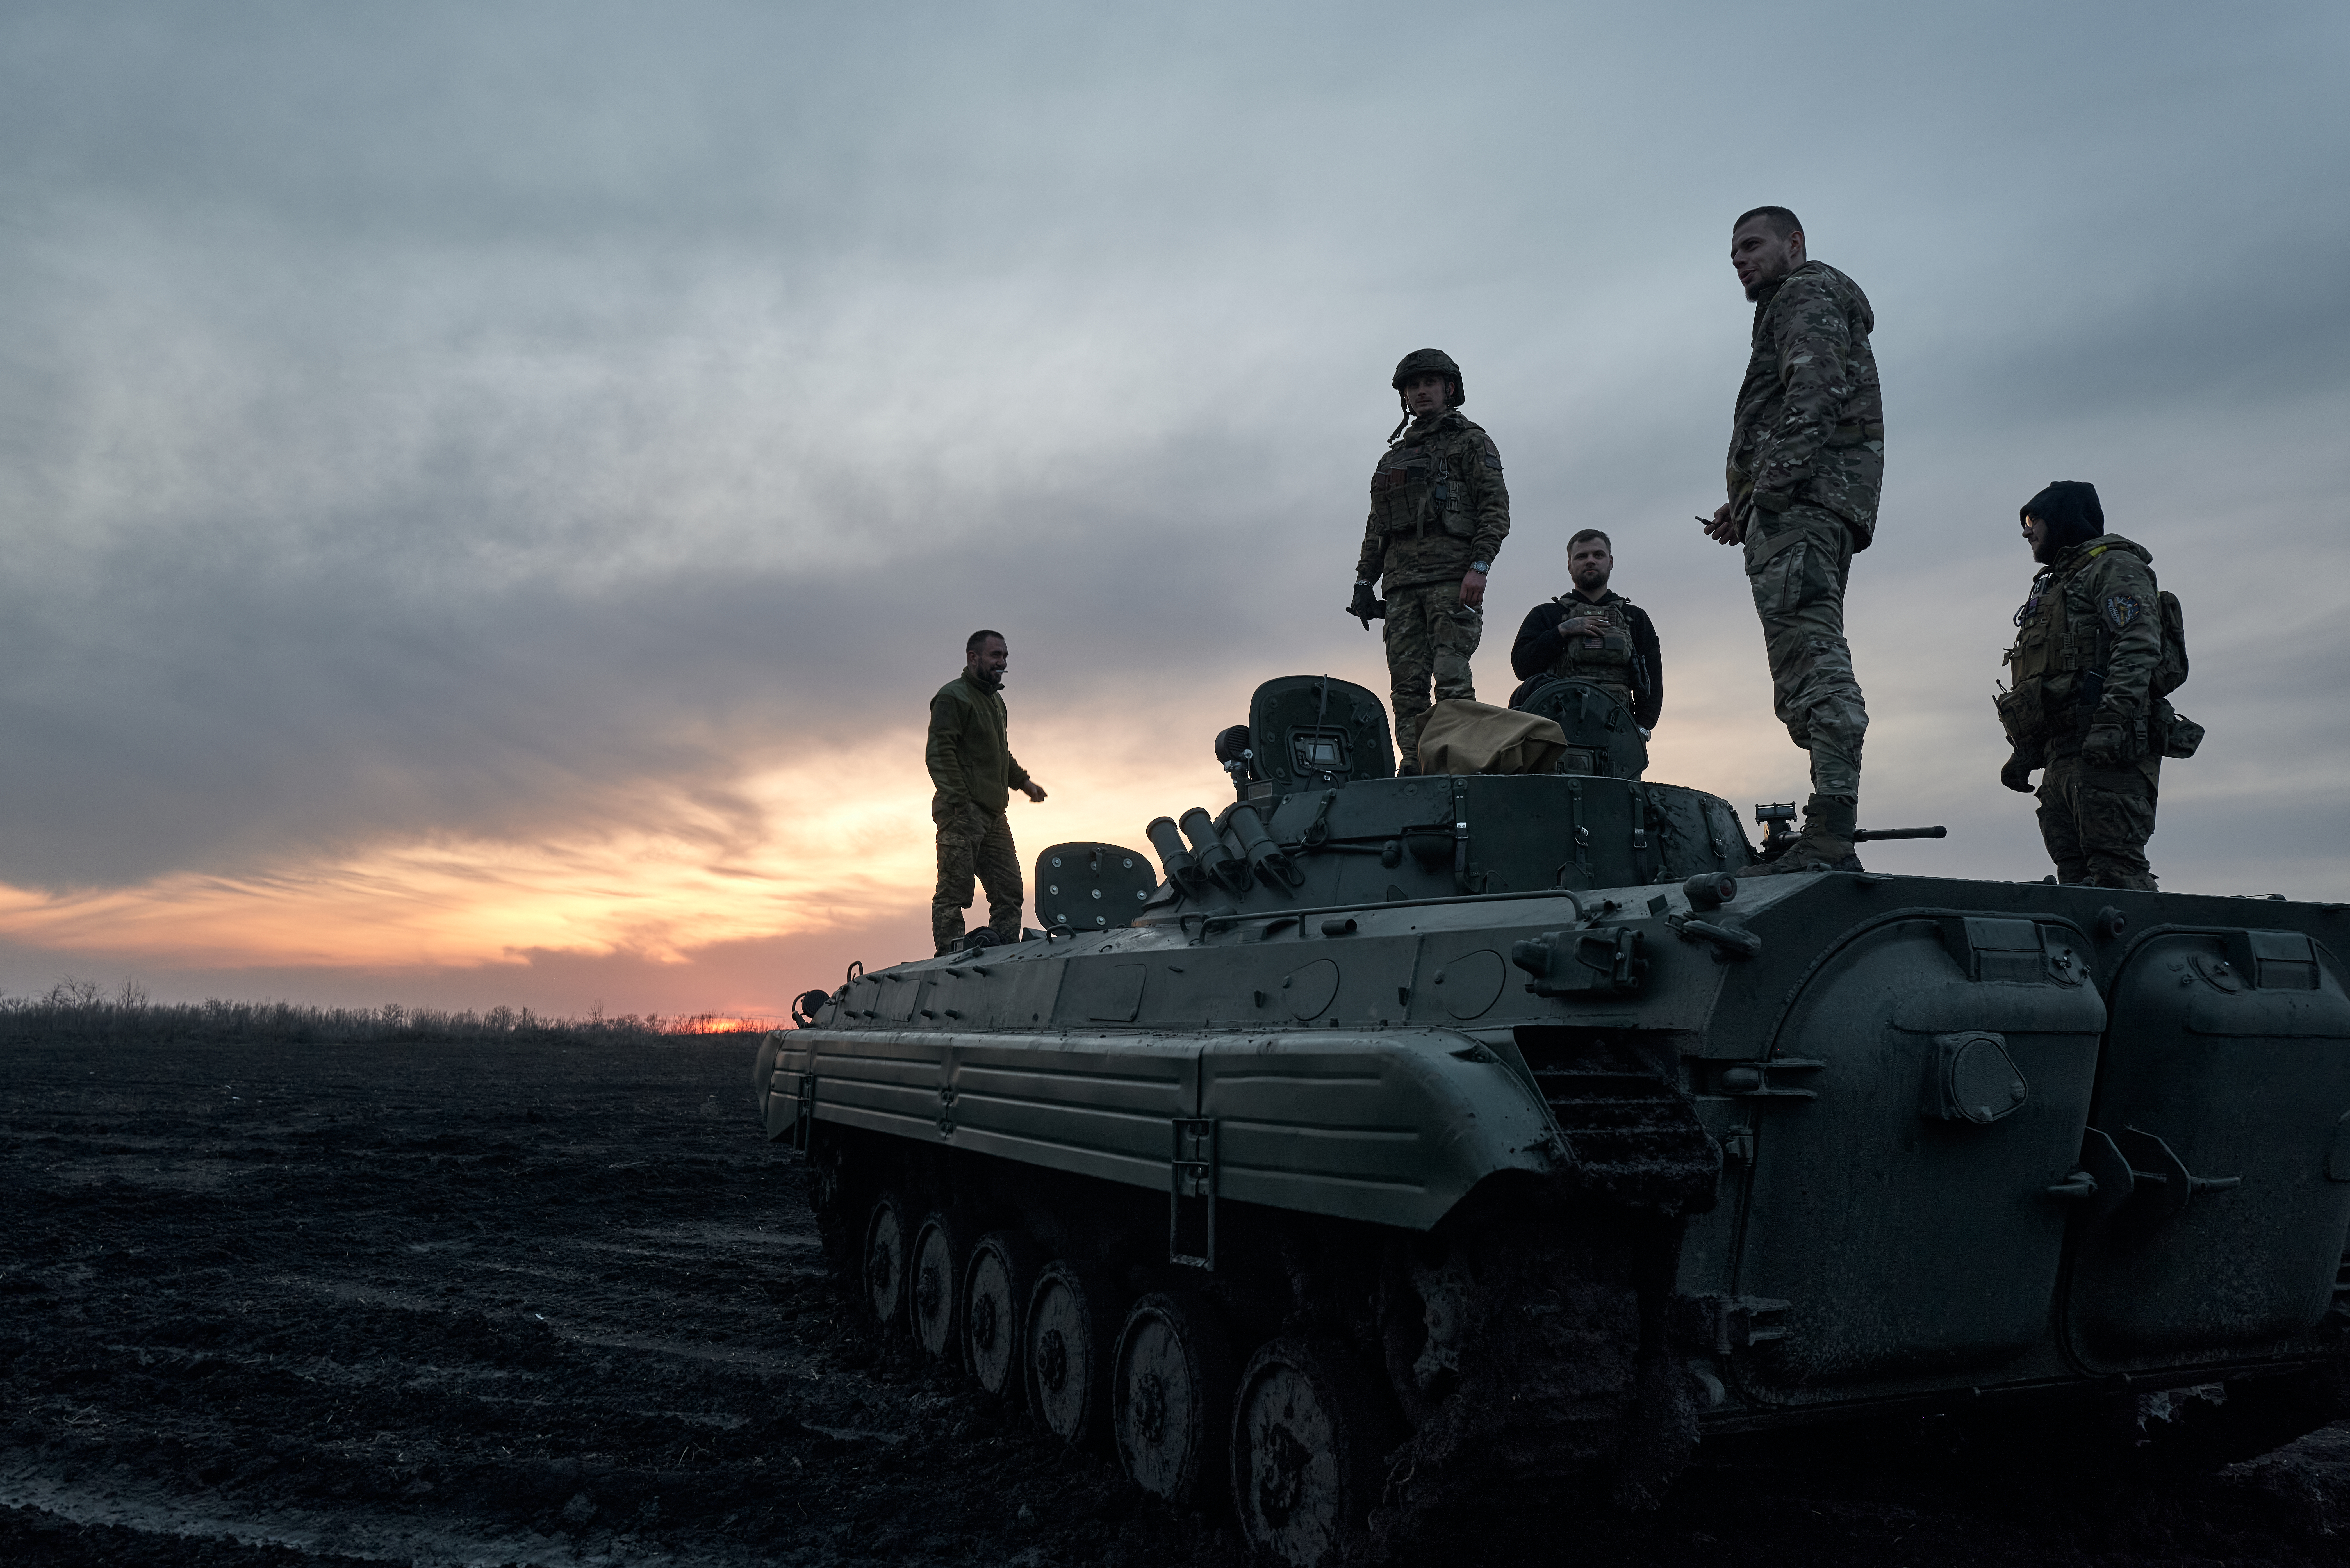 Soldiers standing on a tank in the sunset.